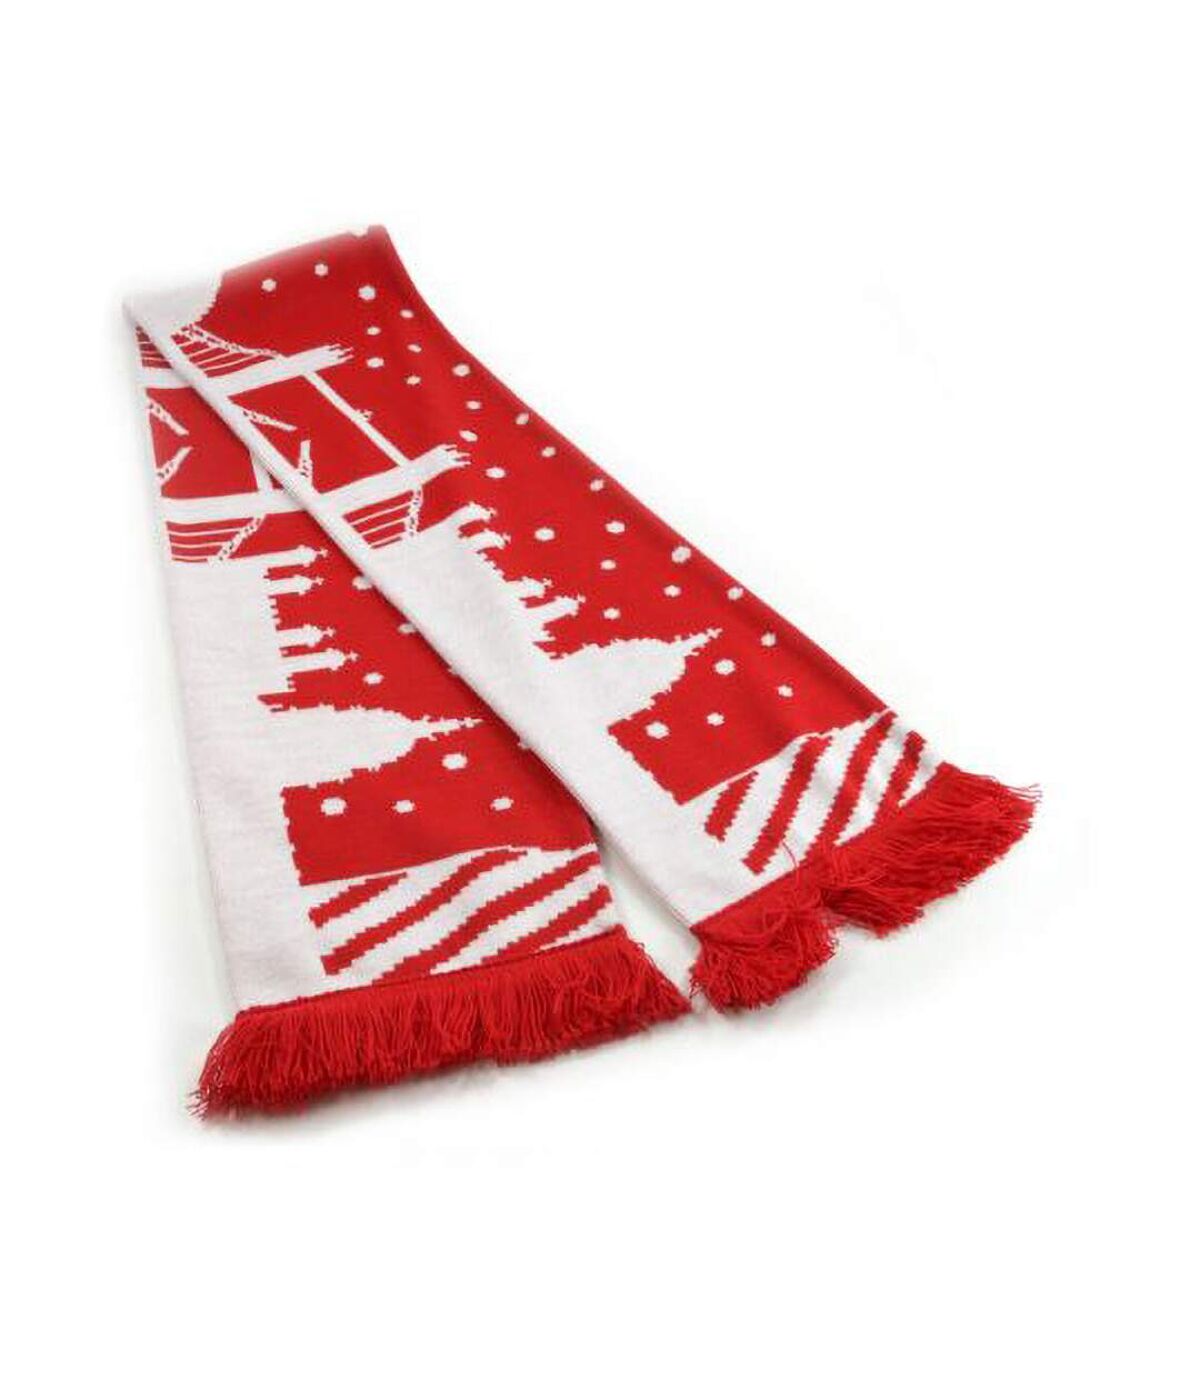 Tower Bridge Christmas Scarf (Red/White) (One Size) - UTBS262